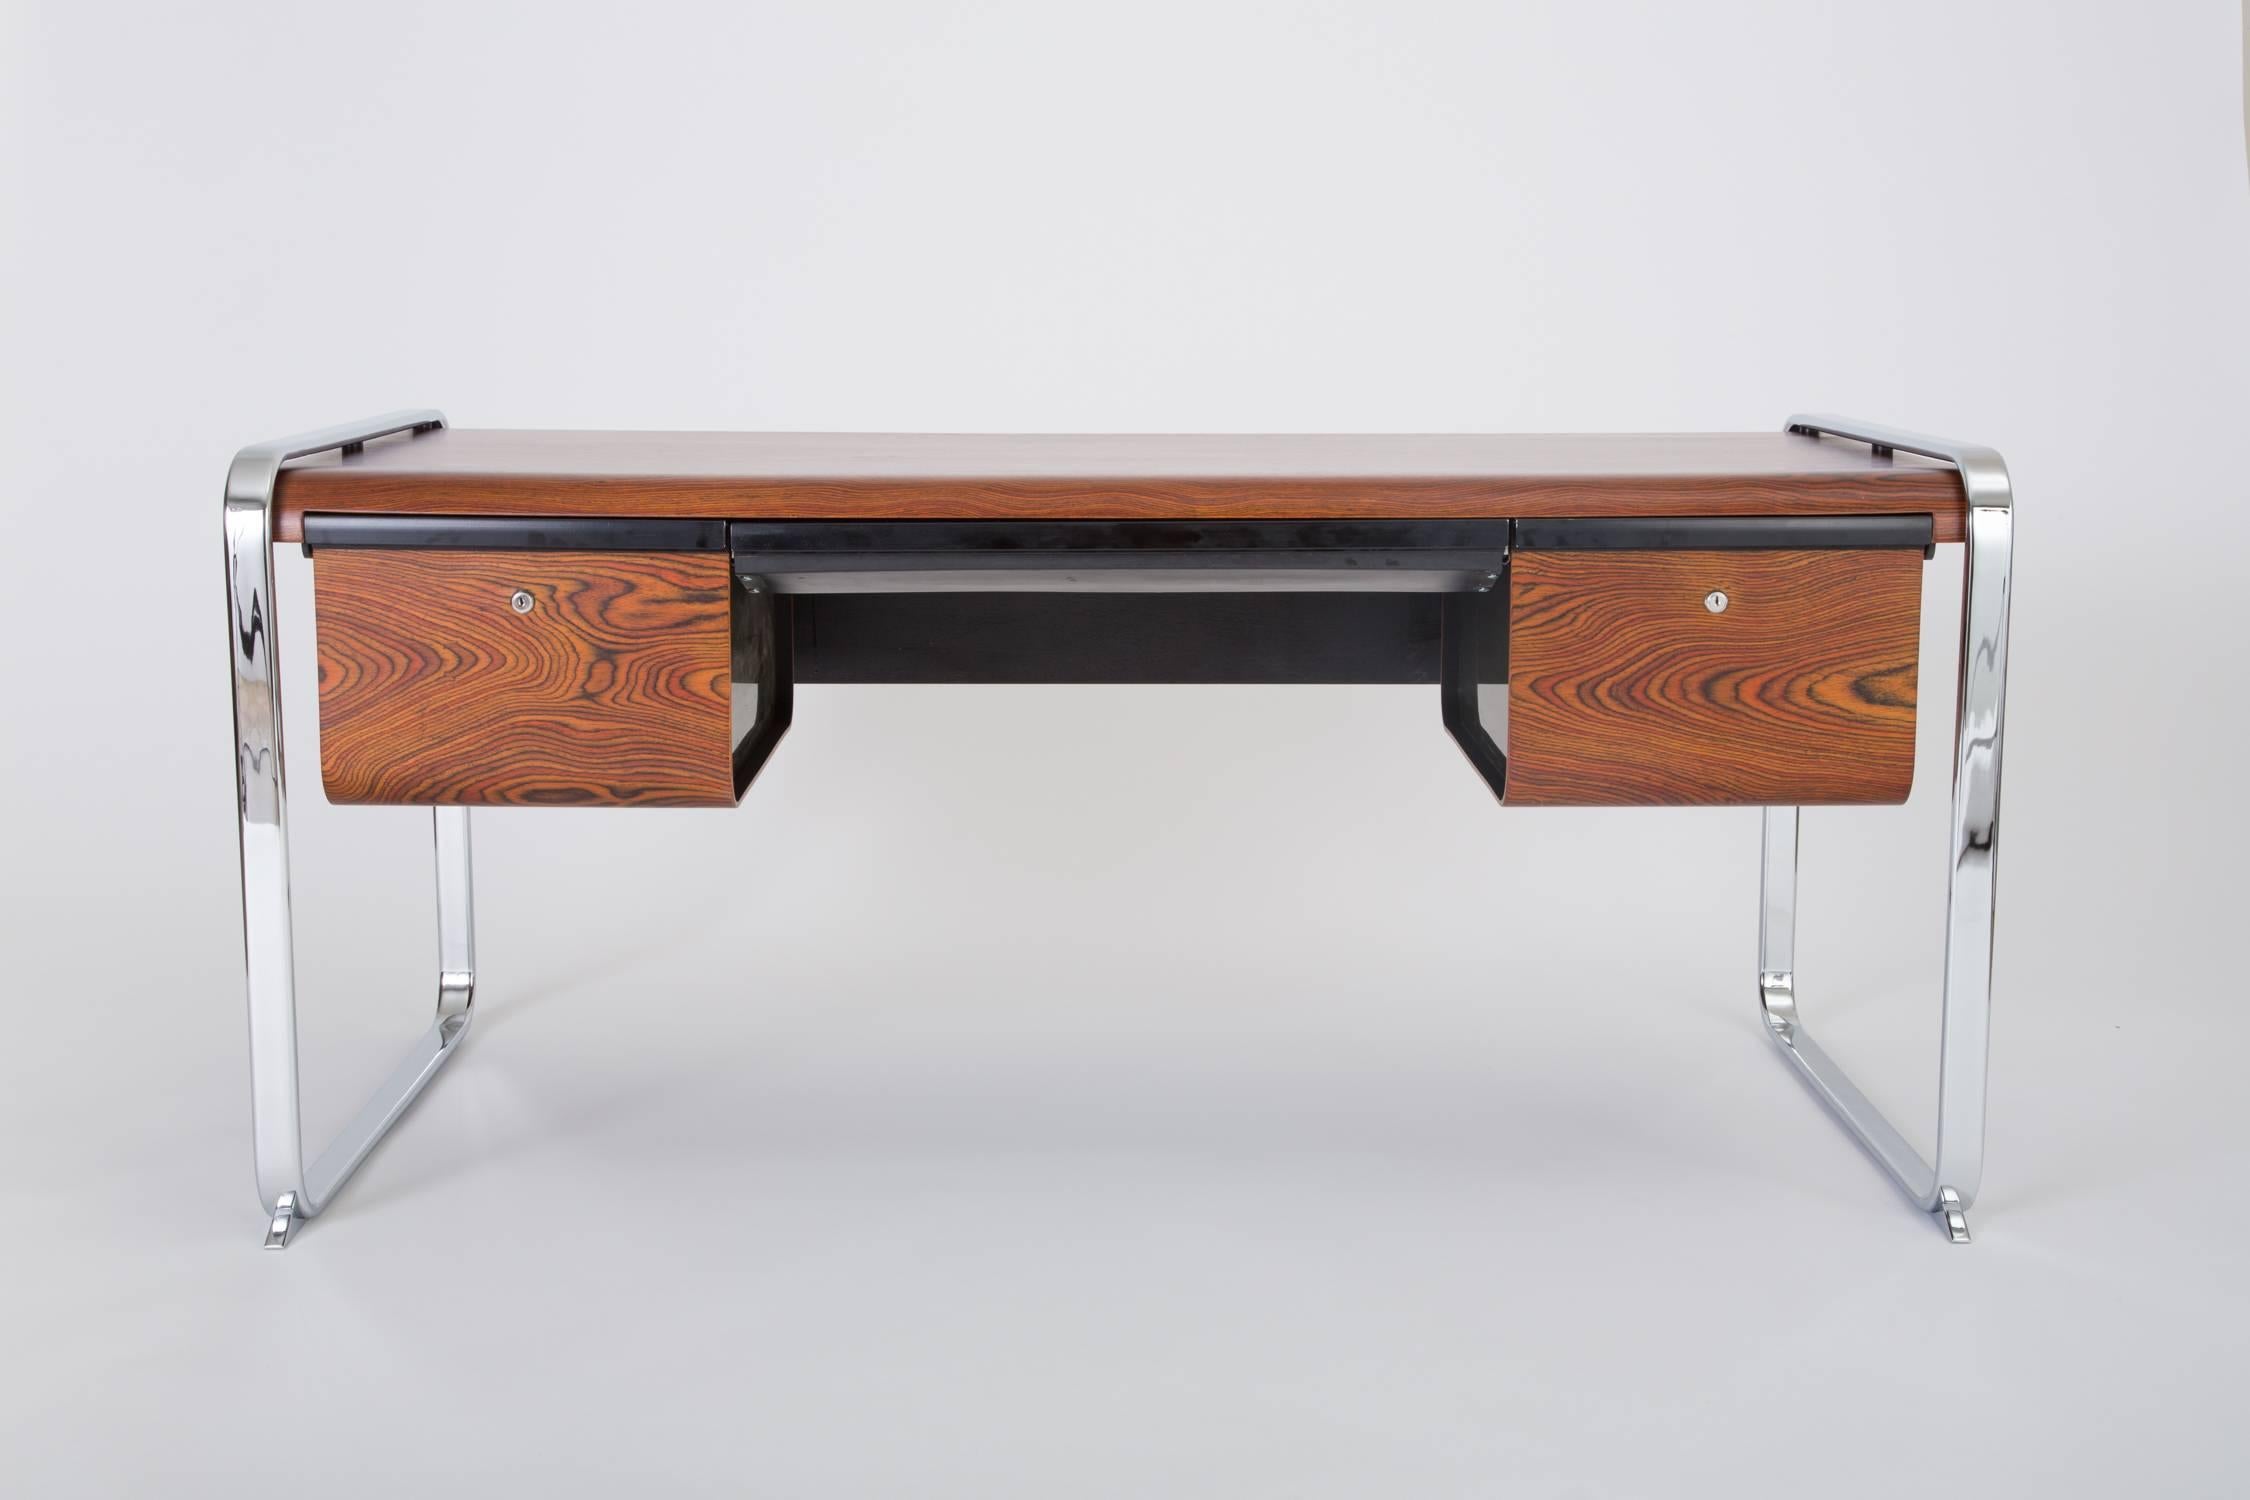 An executive desk from Peter Protzman's Tubular collection for Herman Miller. Manufactured only from 1970-1971, the design features a case of zebrawood veneer suspended between two frame runners of chrome-plated steel. The central seating well has a